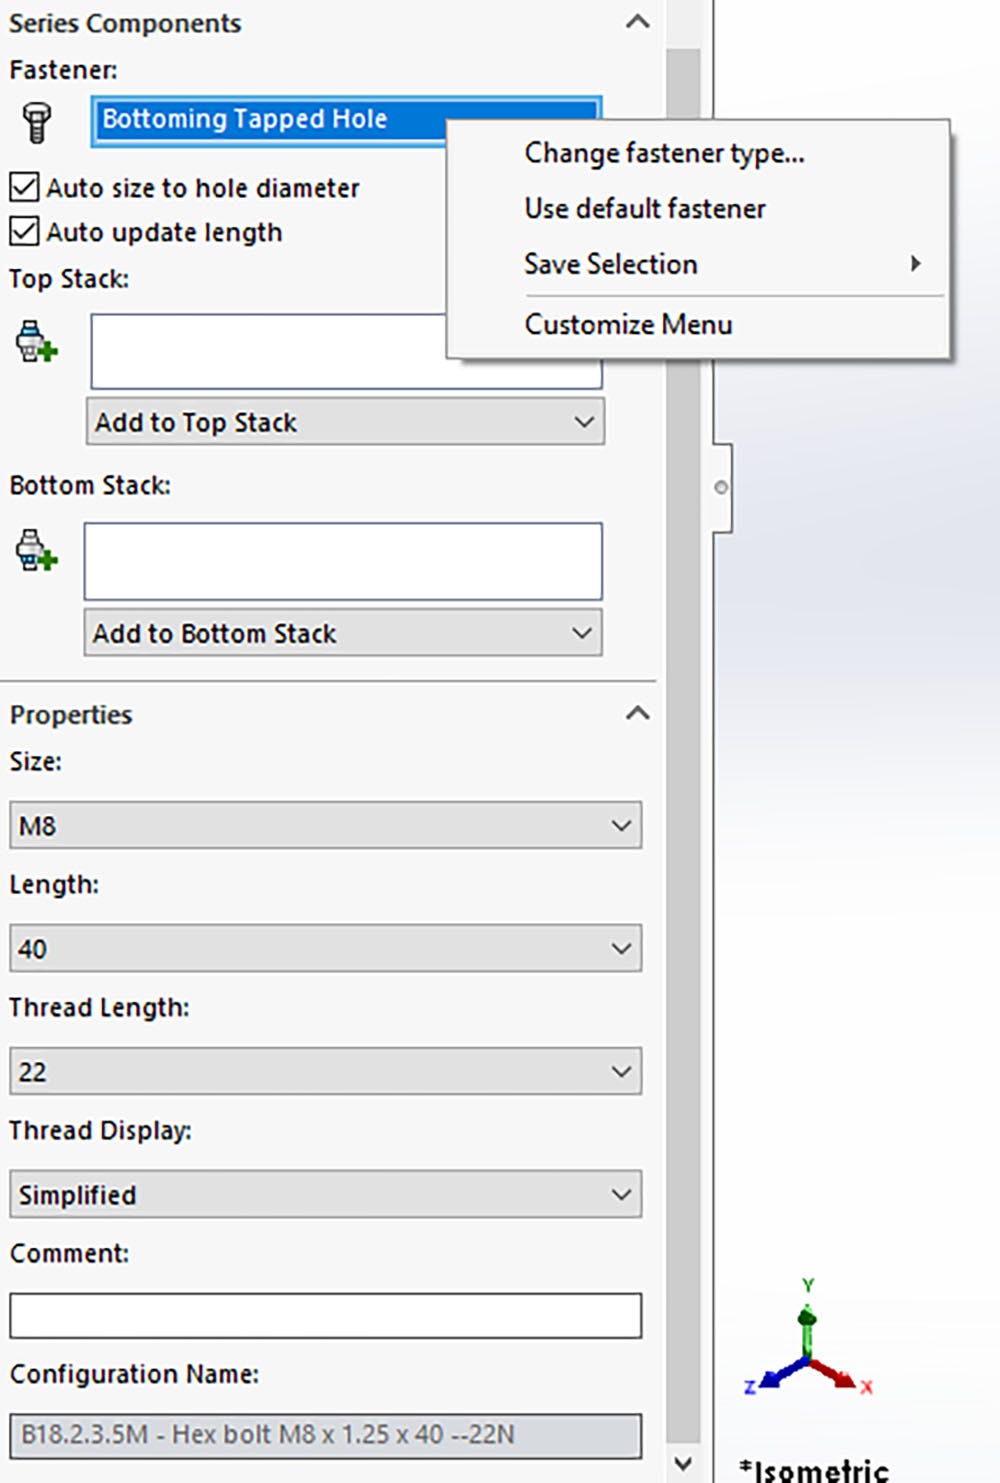 The editing menu option for a fastener group in the Smart Fasteners tool in SOLIDWORKS 